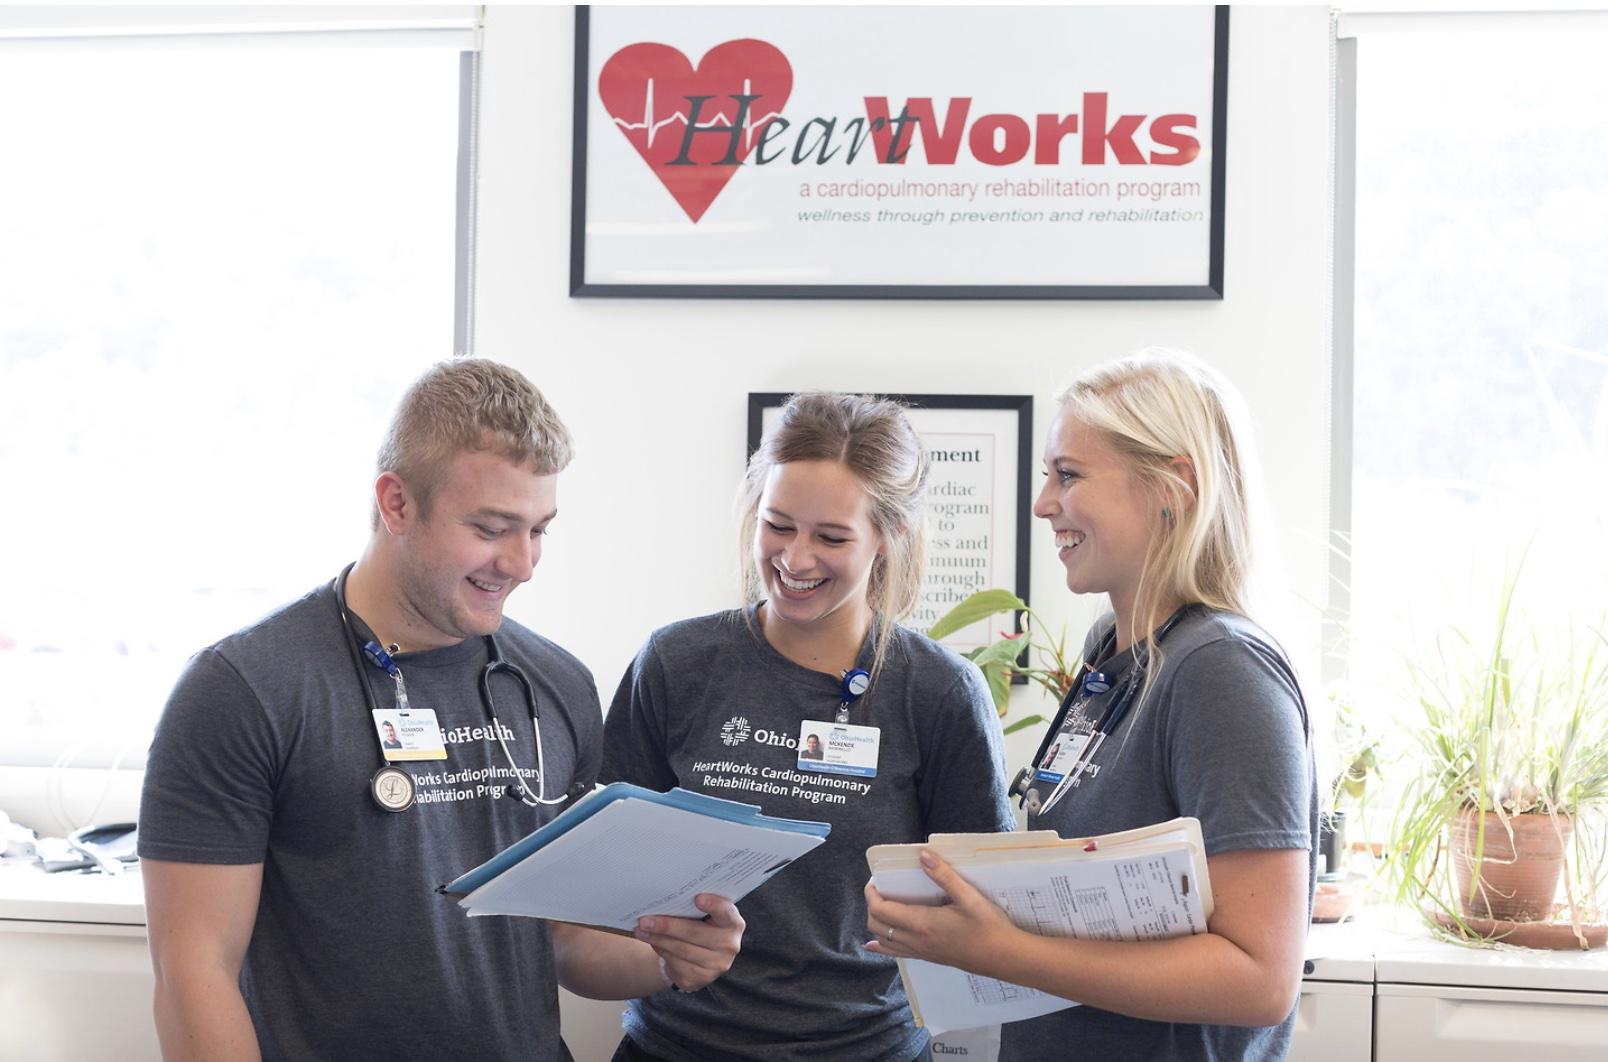 Exercise Physiology Graduate Students in front of HeartWorks sign